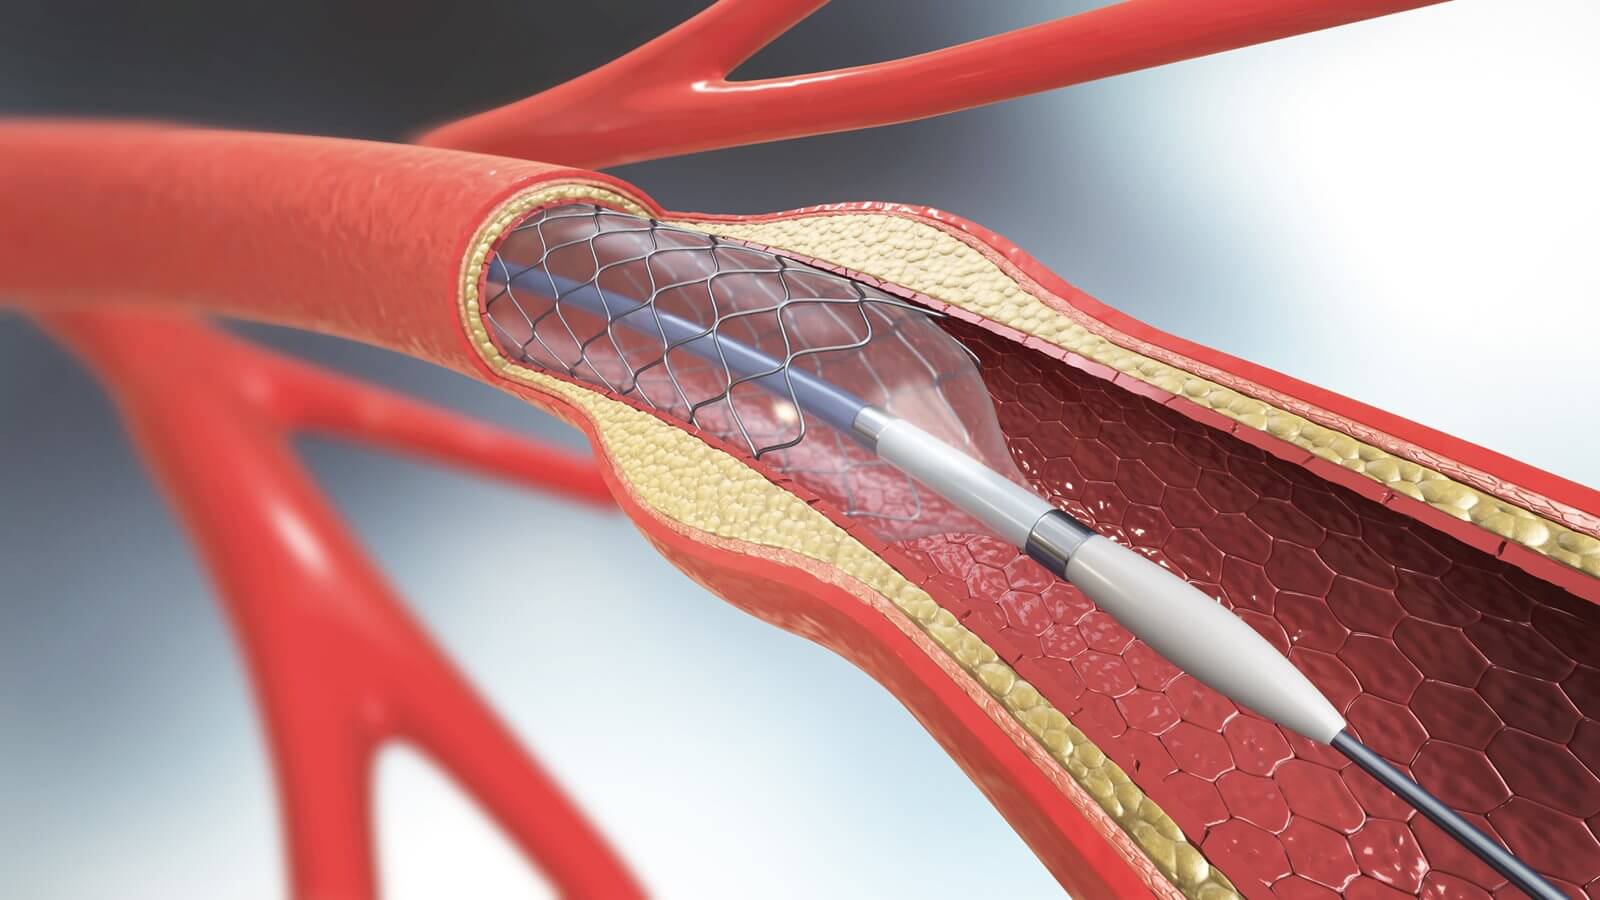 Heart stenting